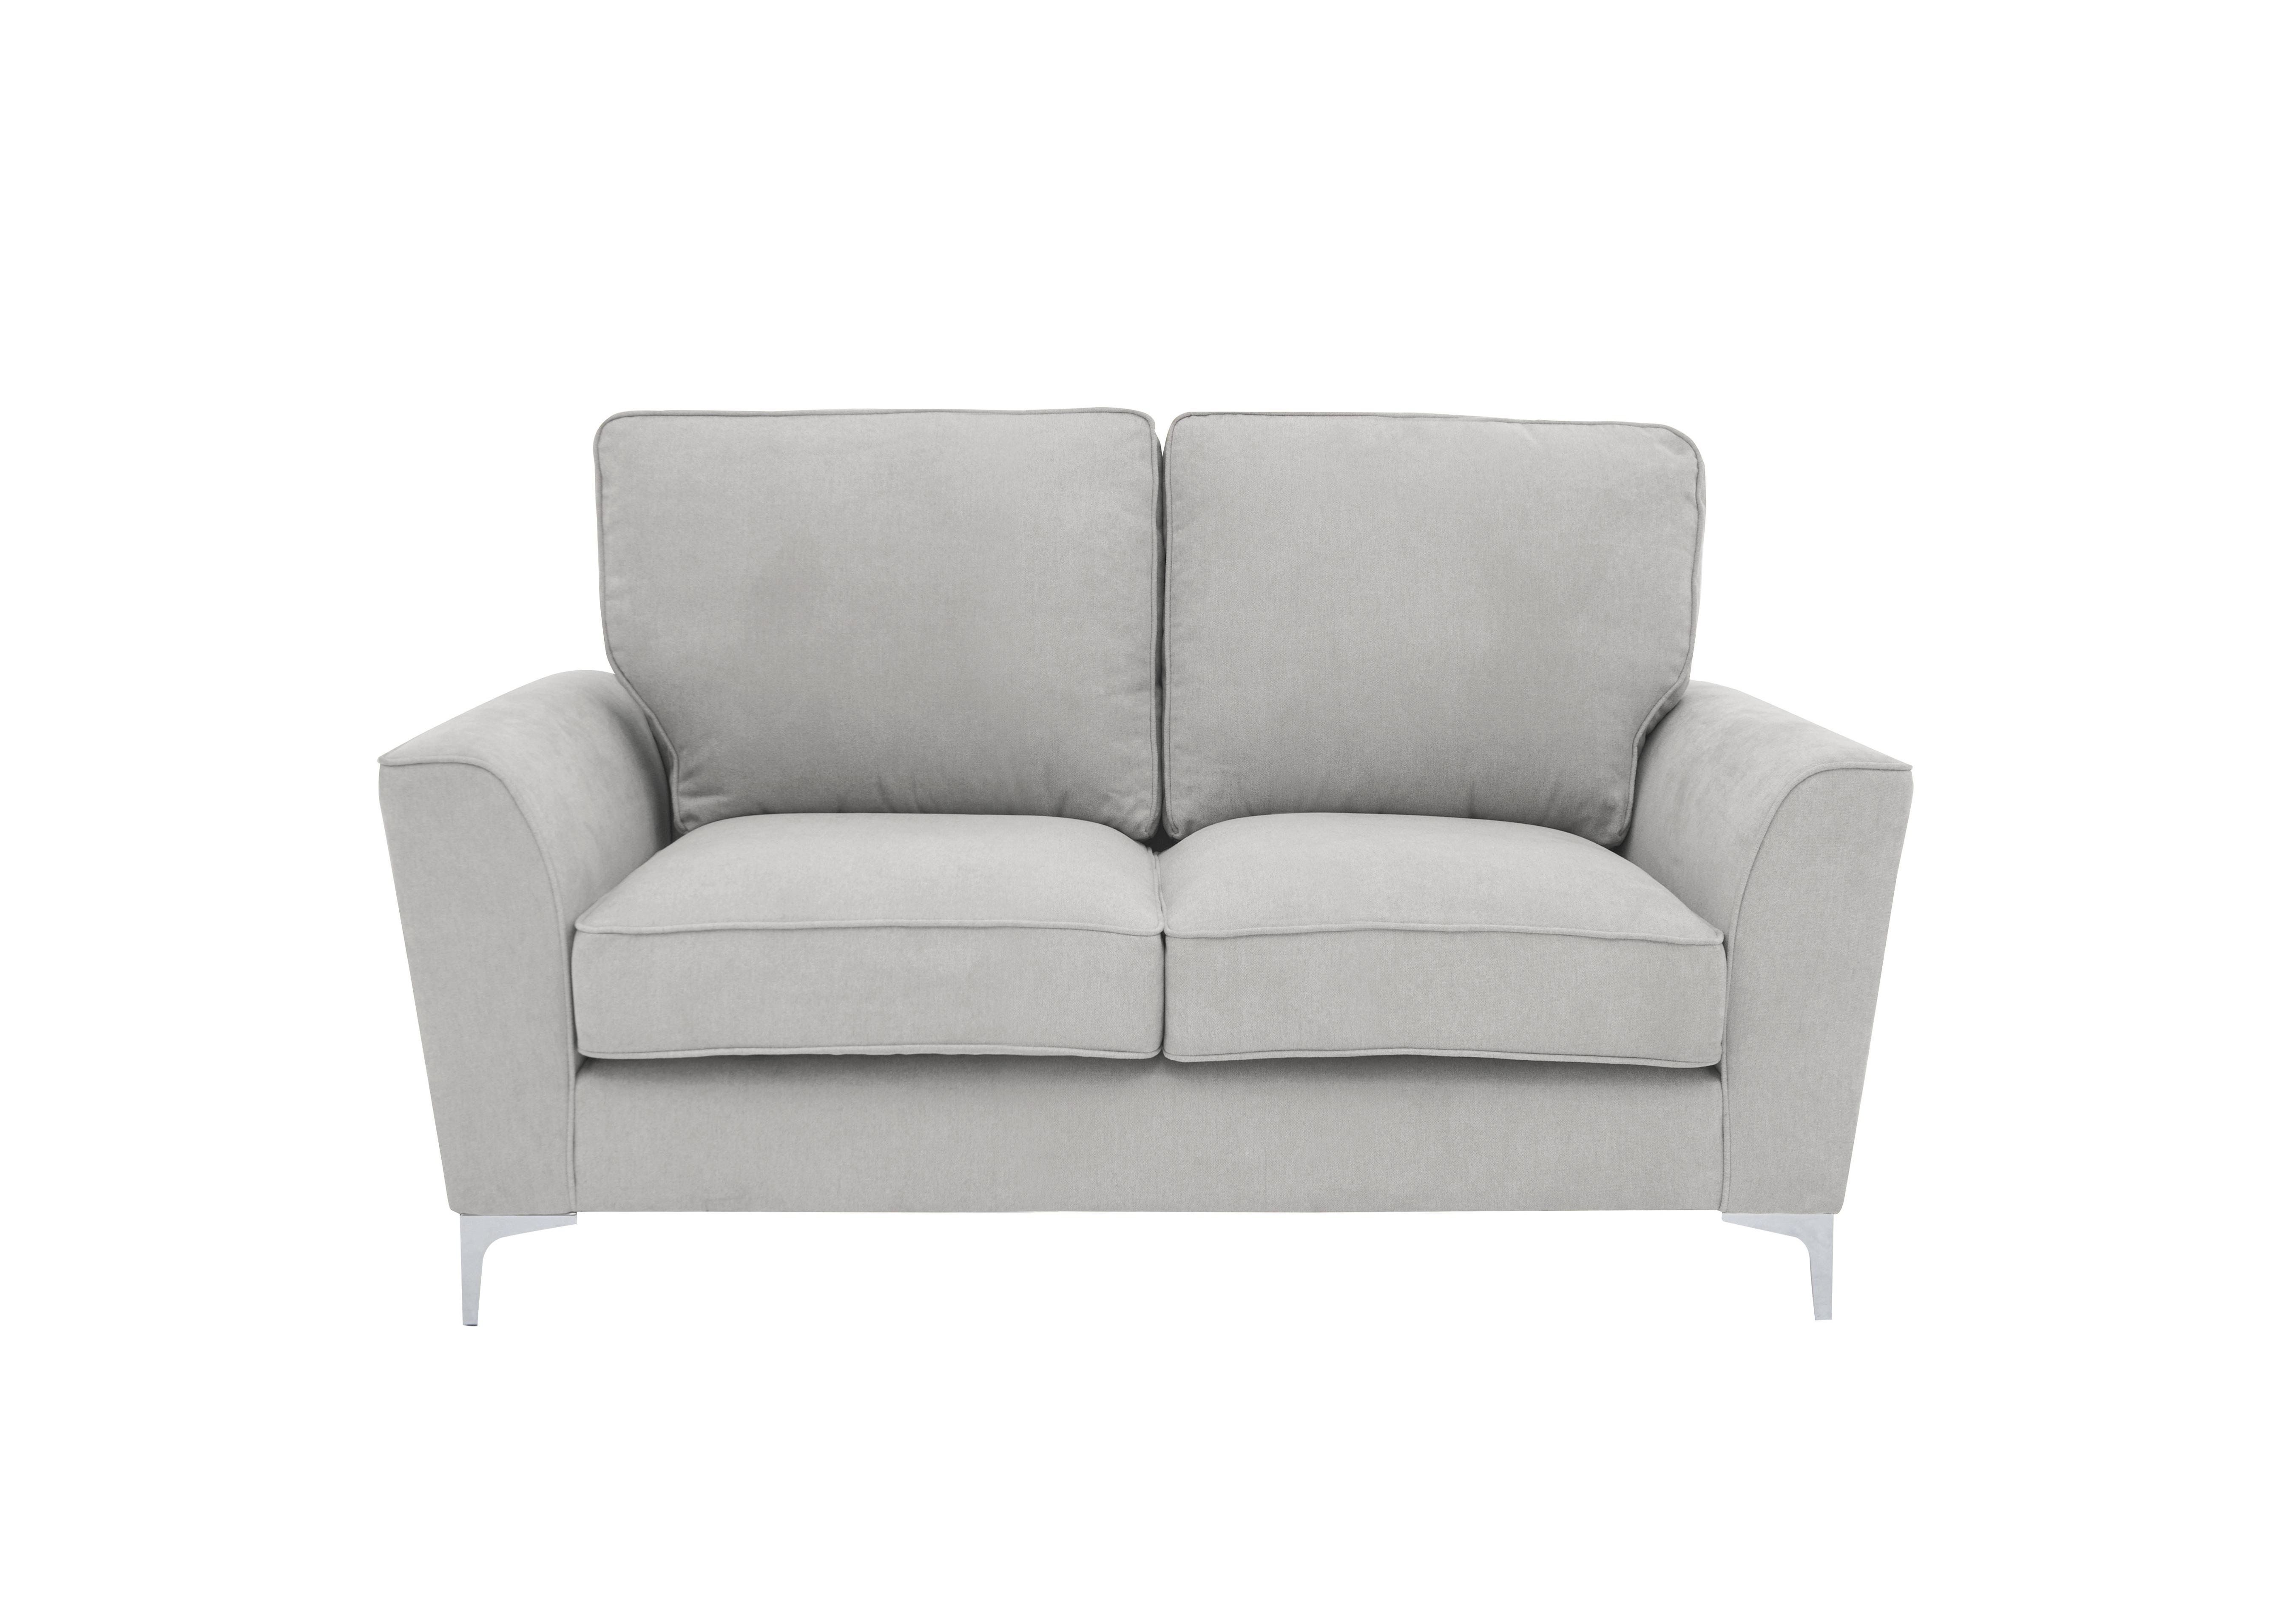 Legend 2 Seater Classic Back Fabric Sofa in Kingston Silver on Furniture Village